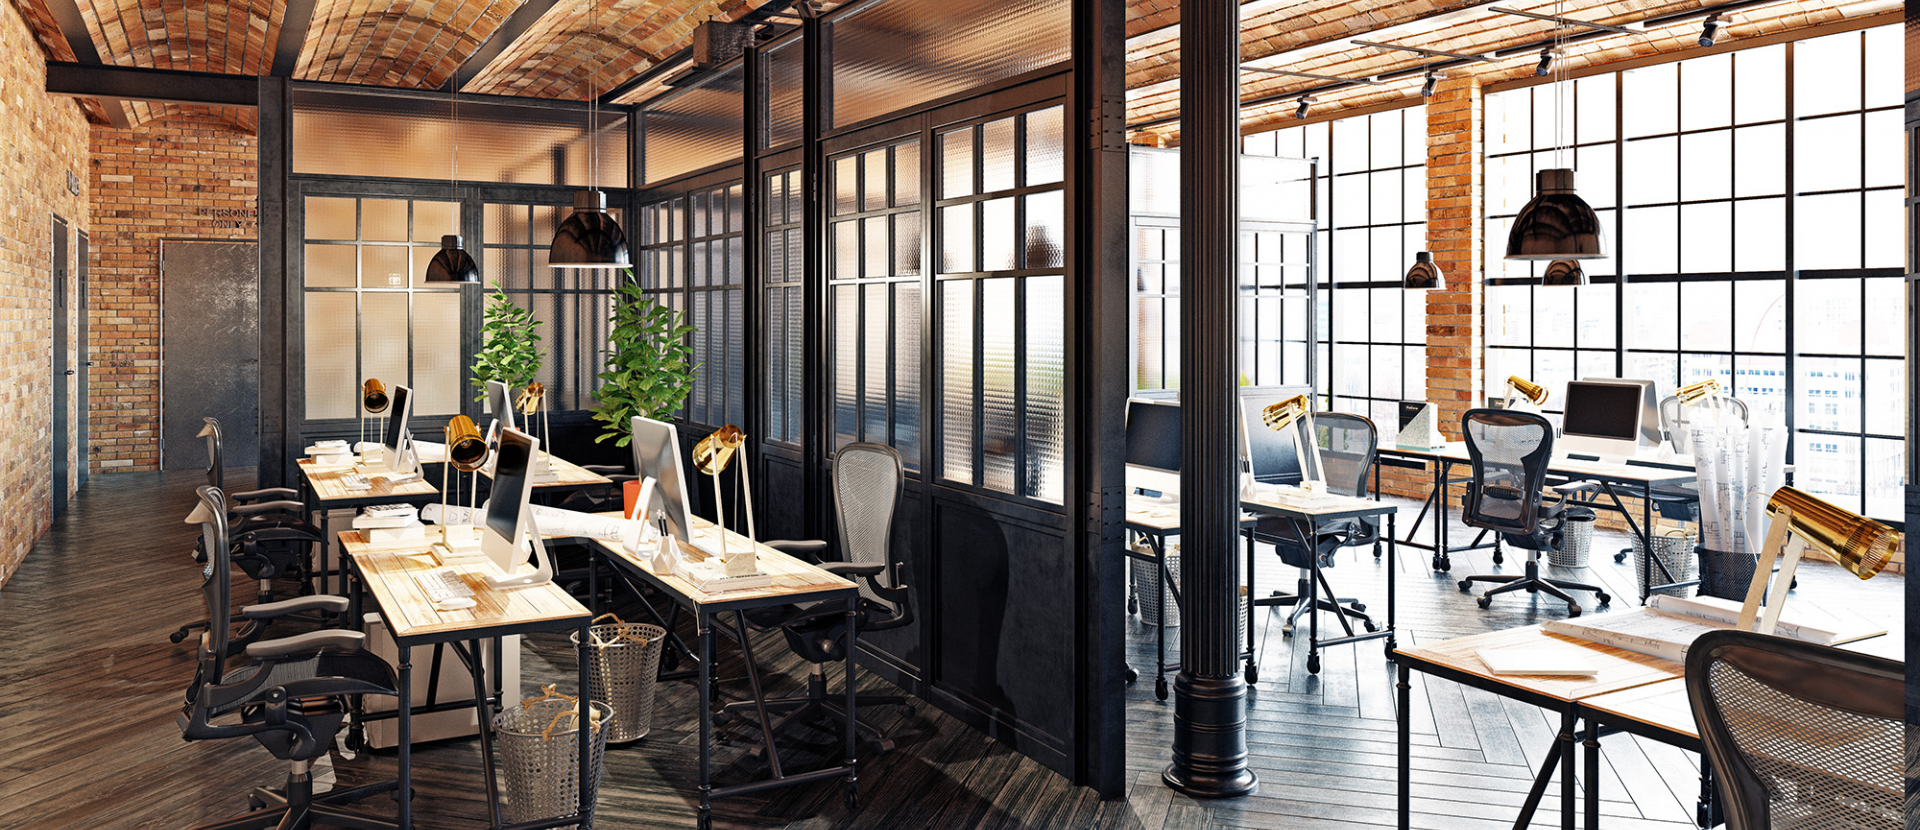 photo of a very wood-focused office space with japanese style paneled walls